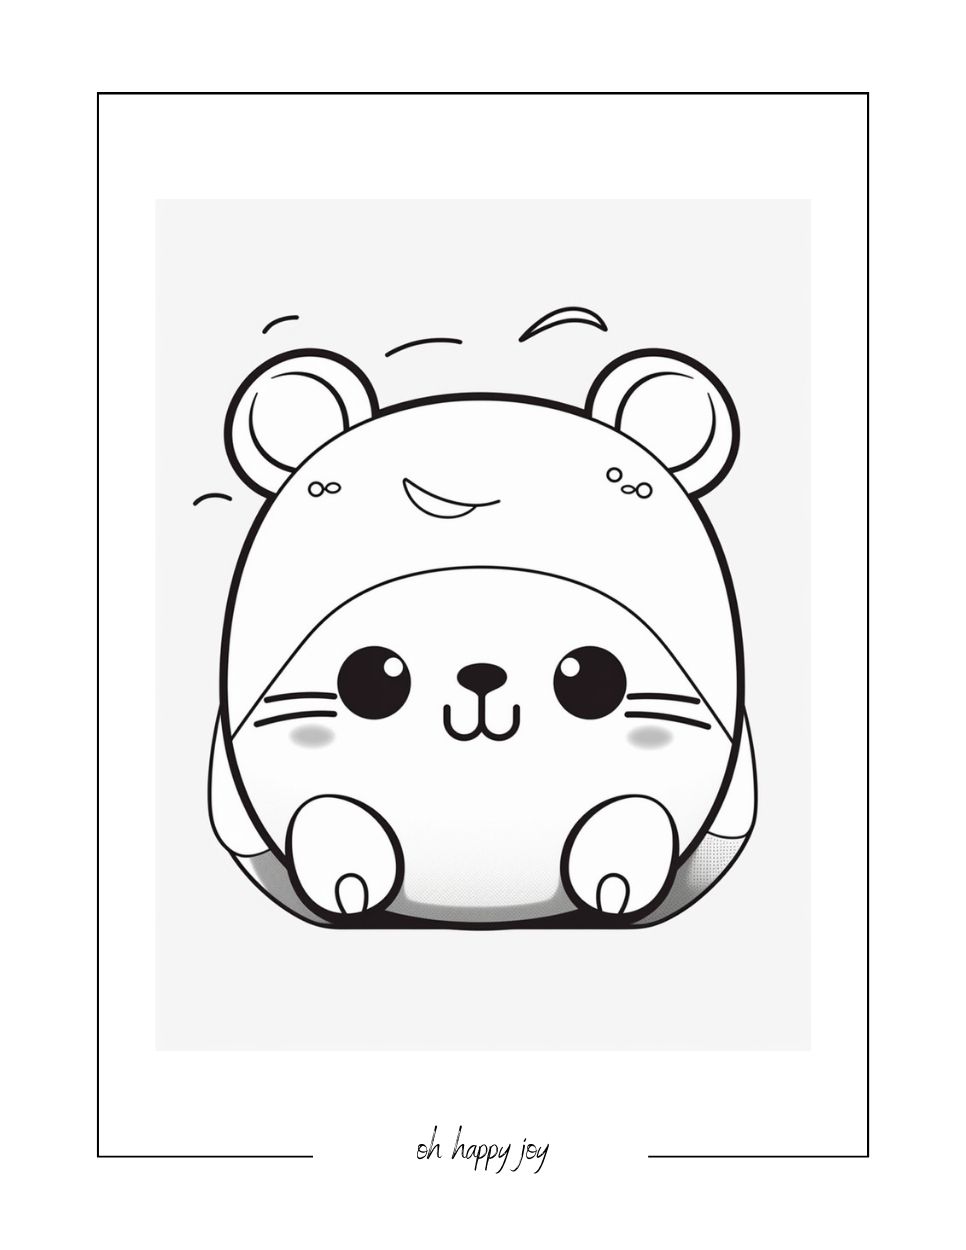 Hat on squishmallow coloring page